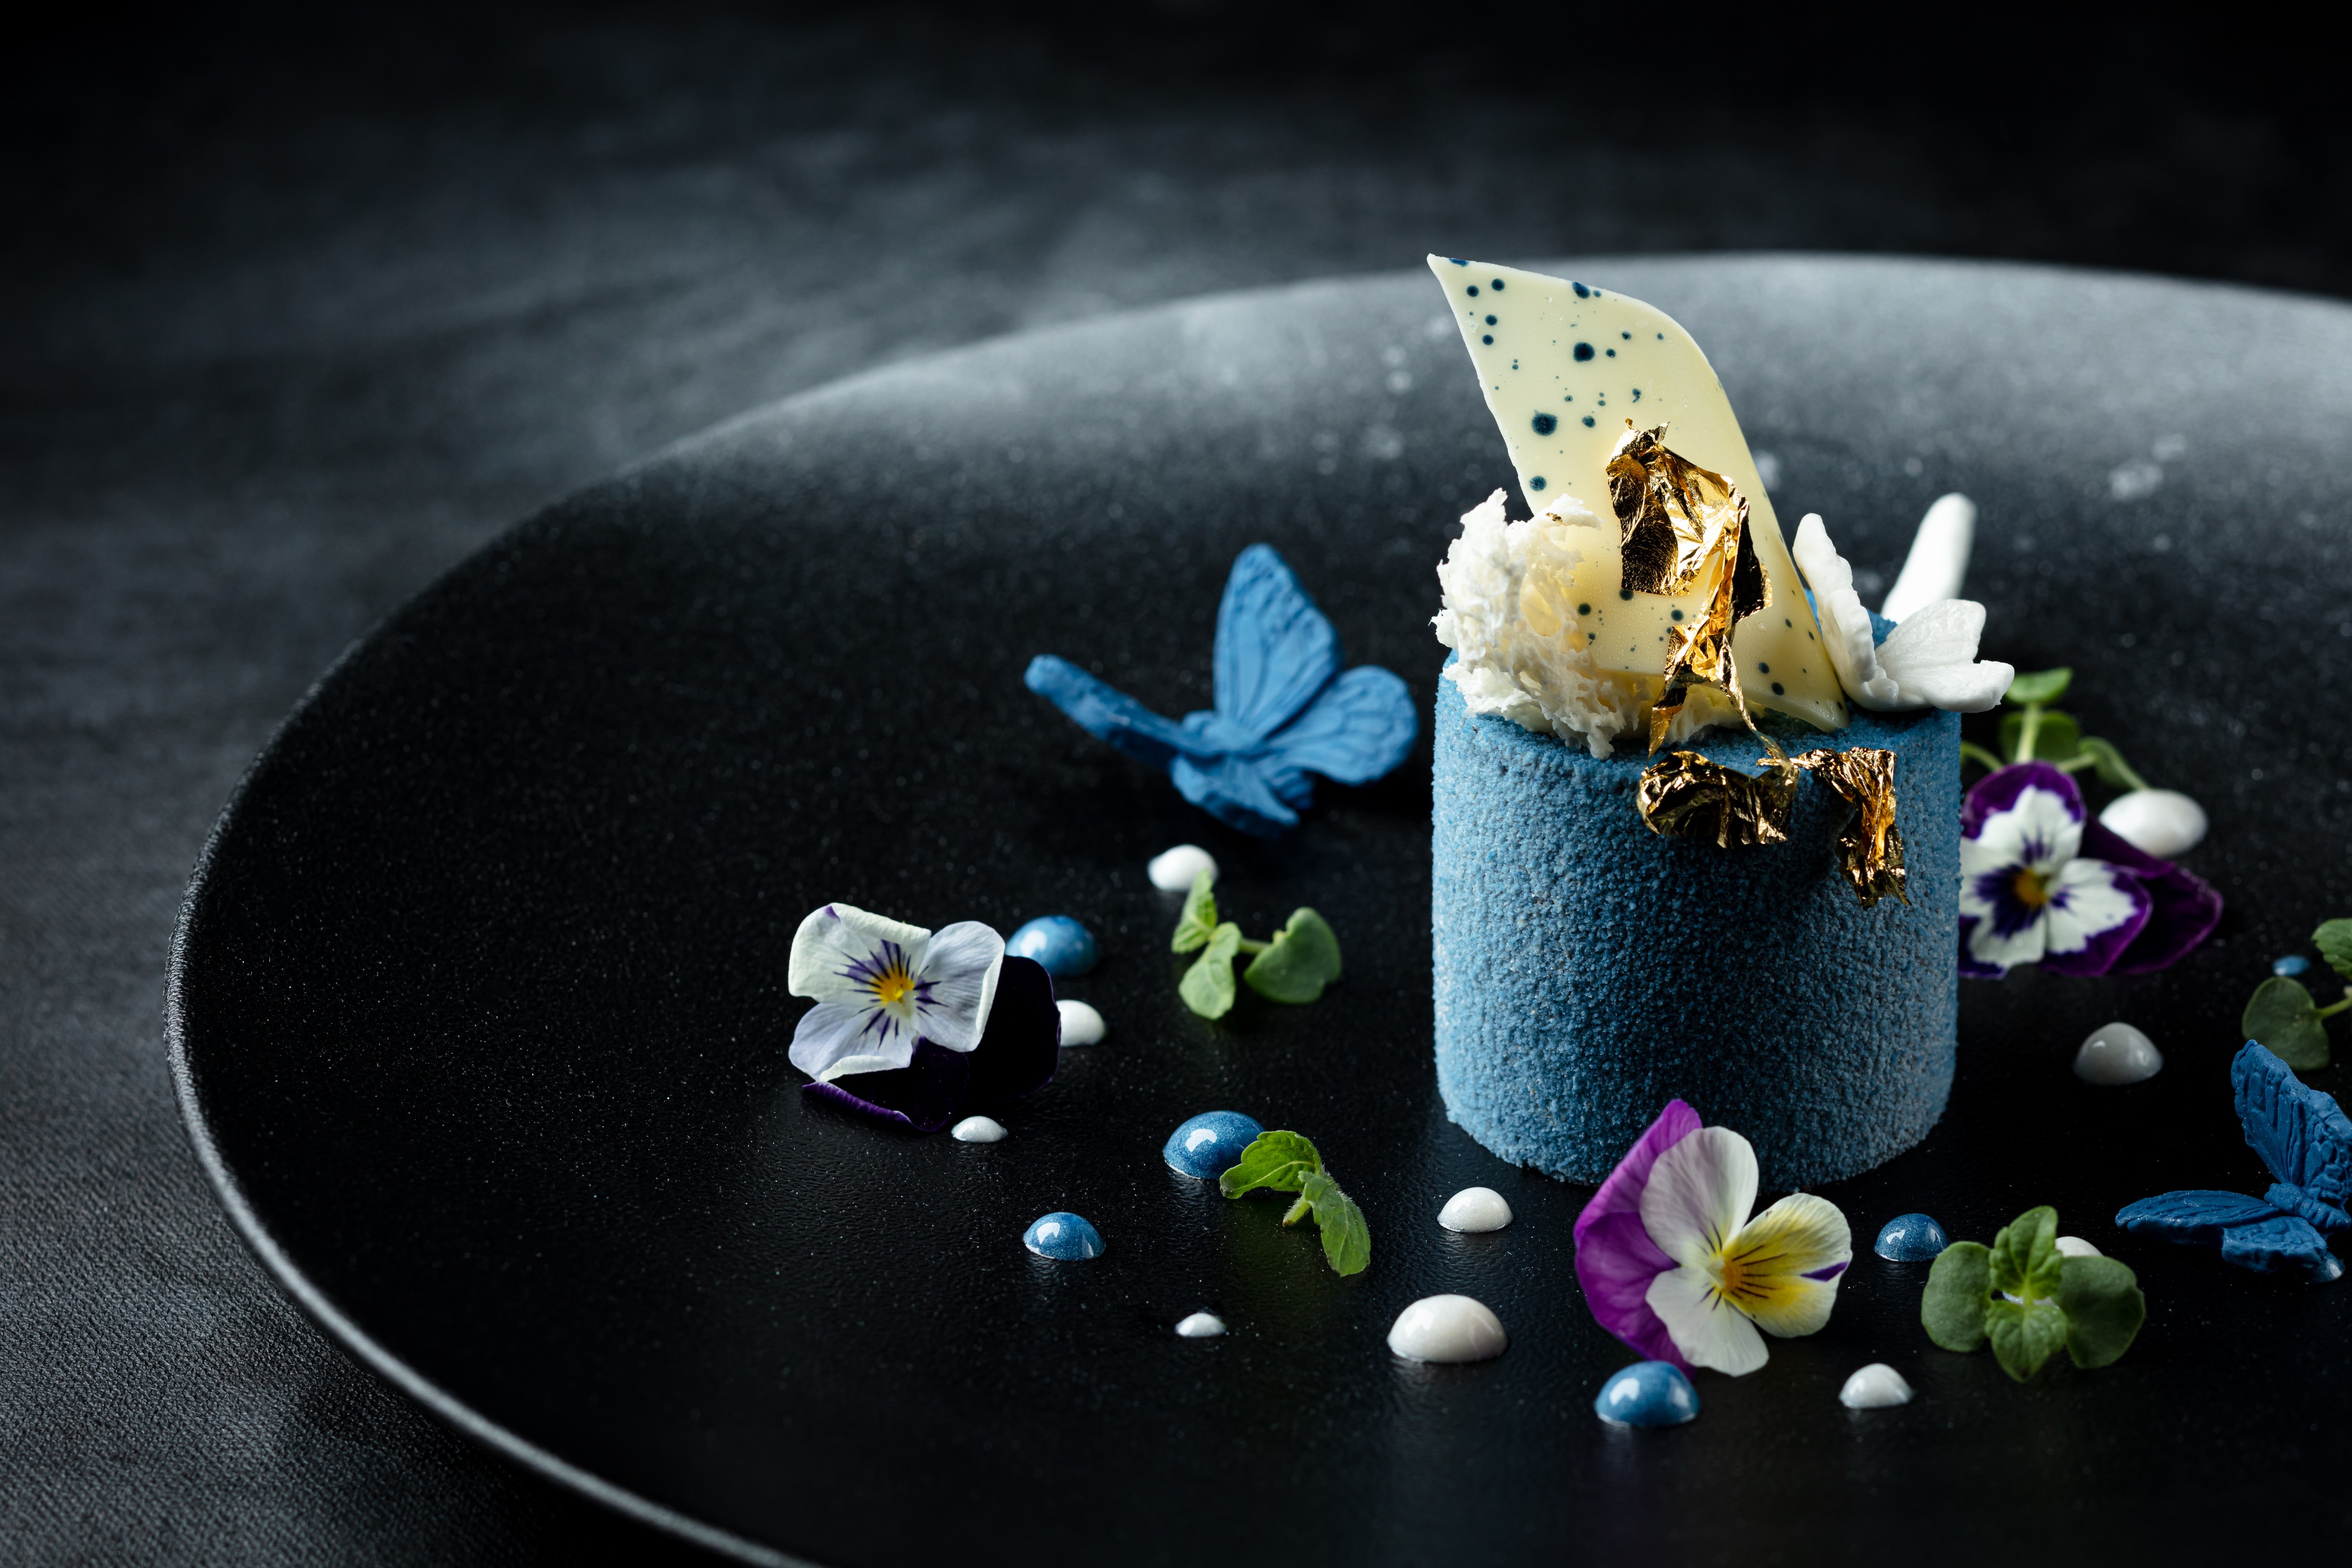 The Golden Peacock’s Prosperity comprises blueberry, hazelnut chocolate mousse, yogurt, cardamom, cherry and gold leaf.